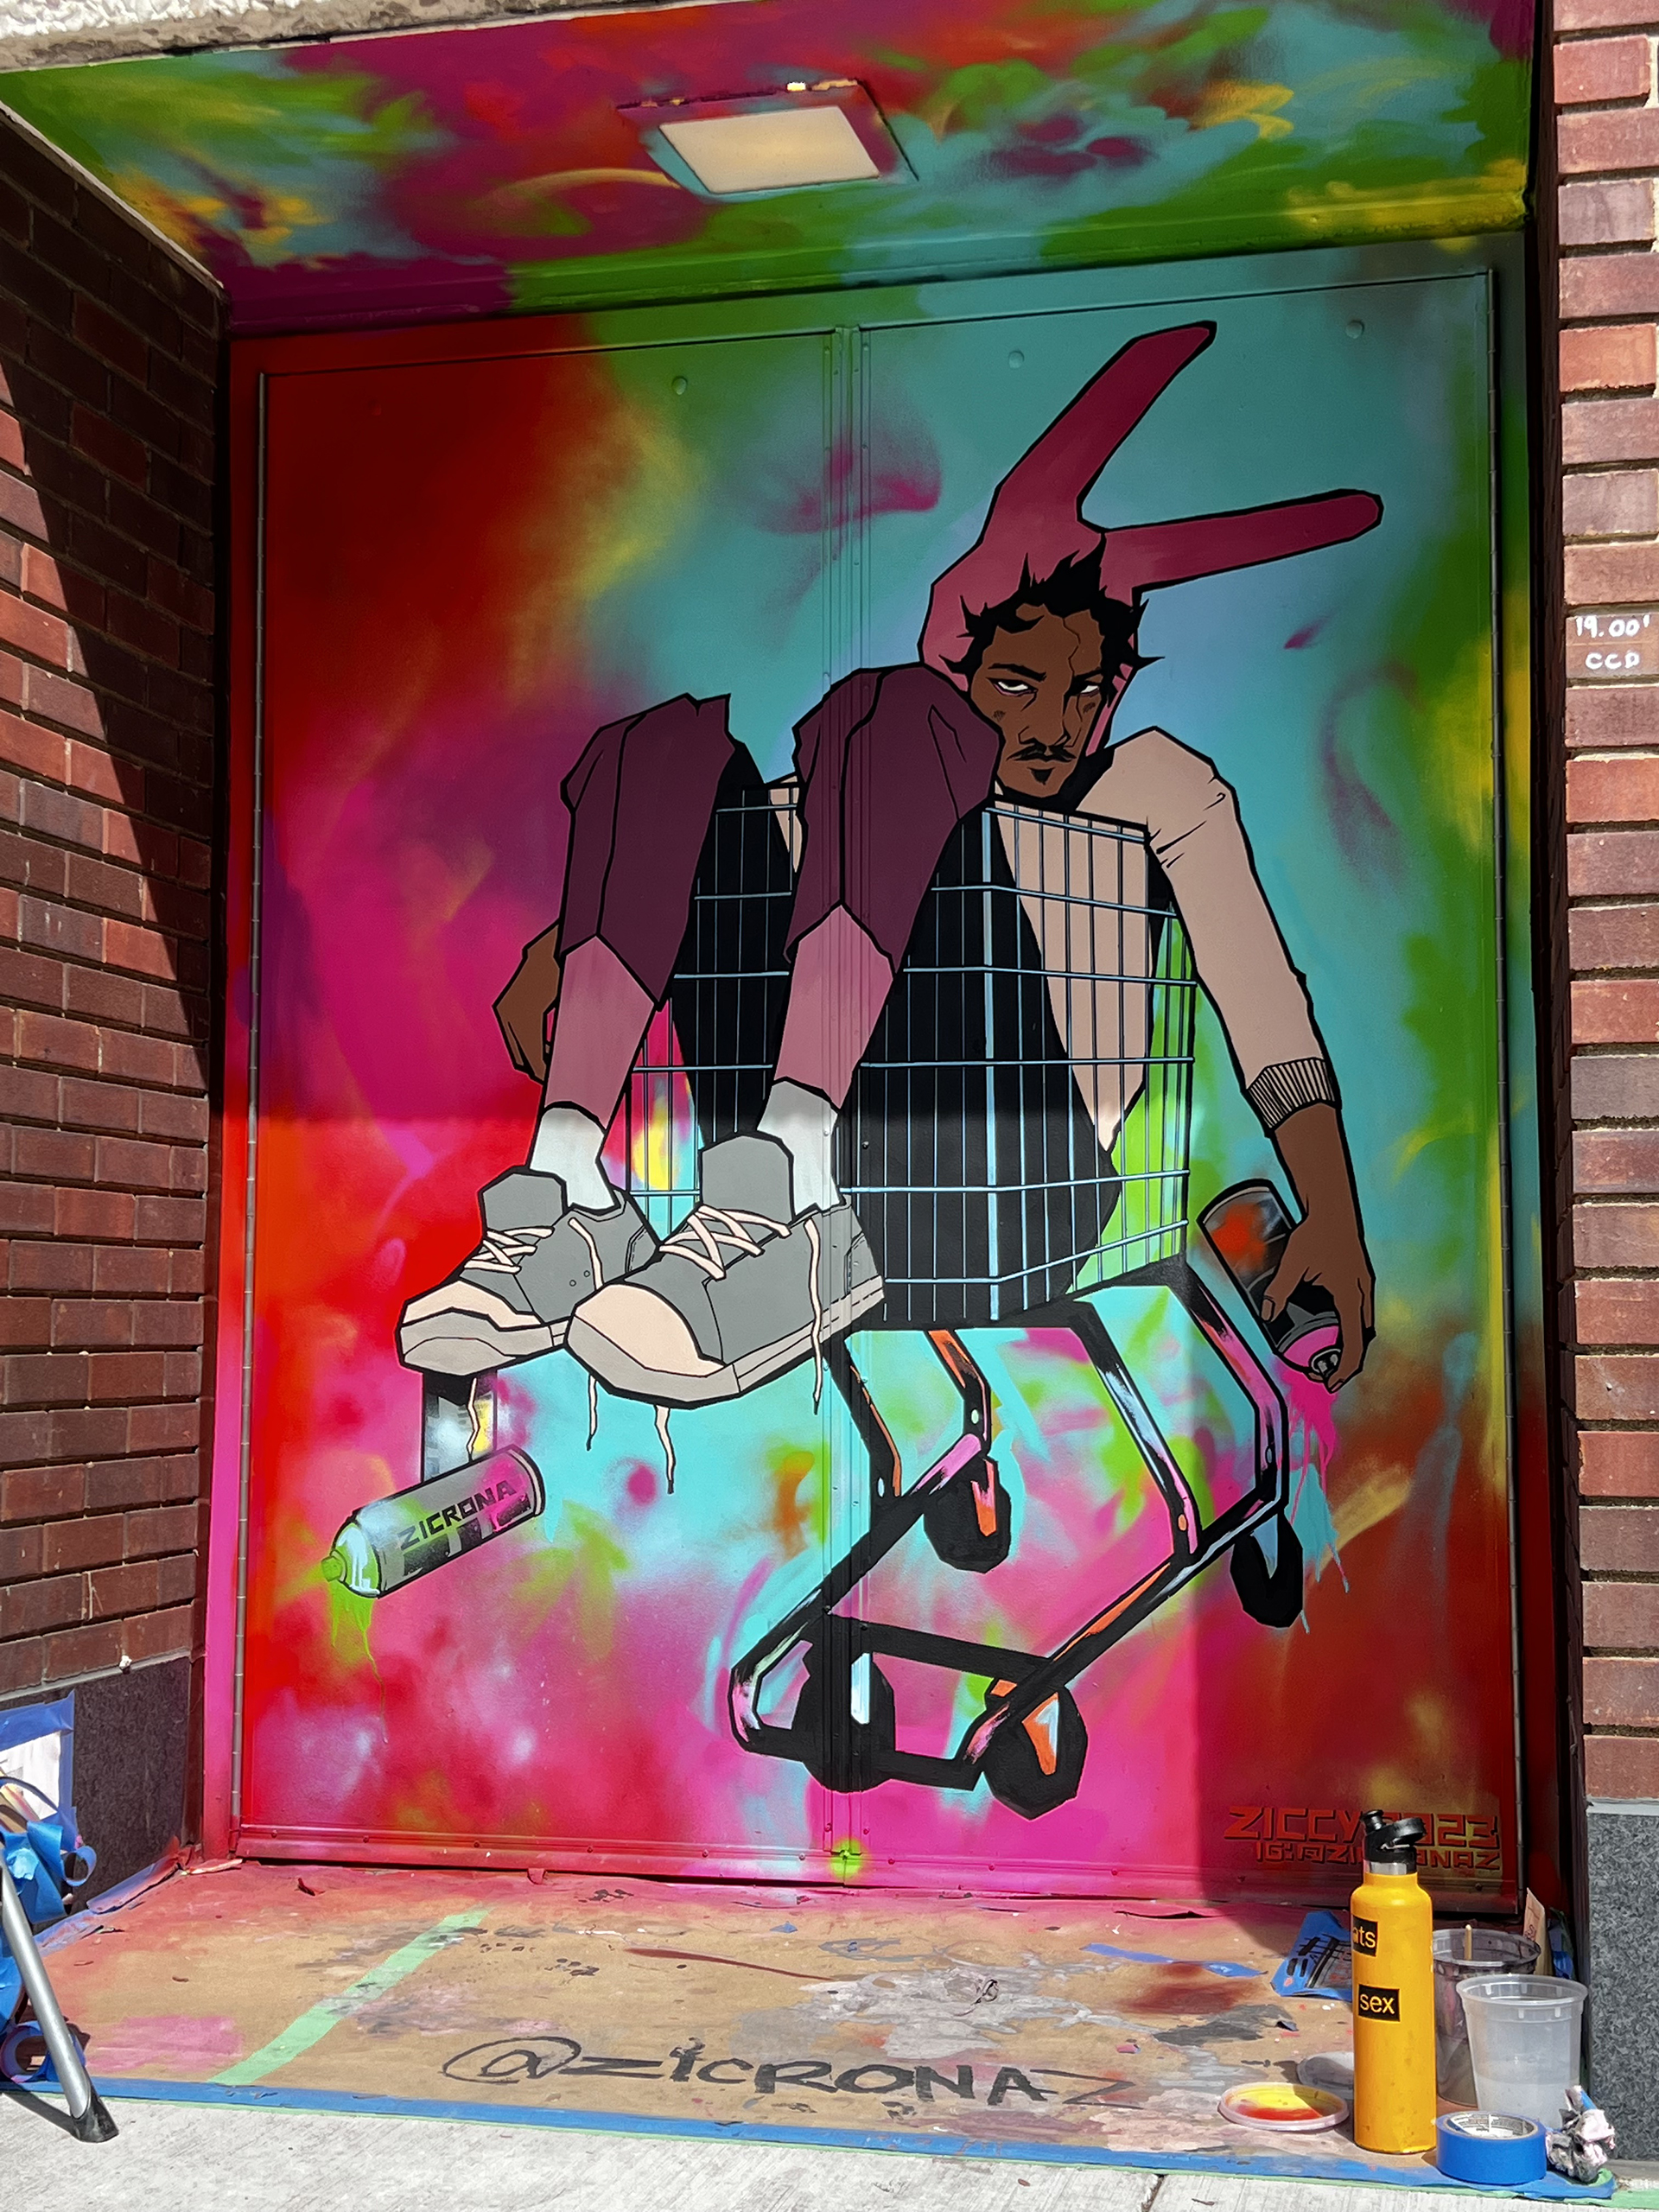 A mural on a doorway featuring tie-dye like spray paint and a figure wearing bunny ears laying in a shopping cart with spray paint cans.